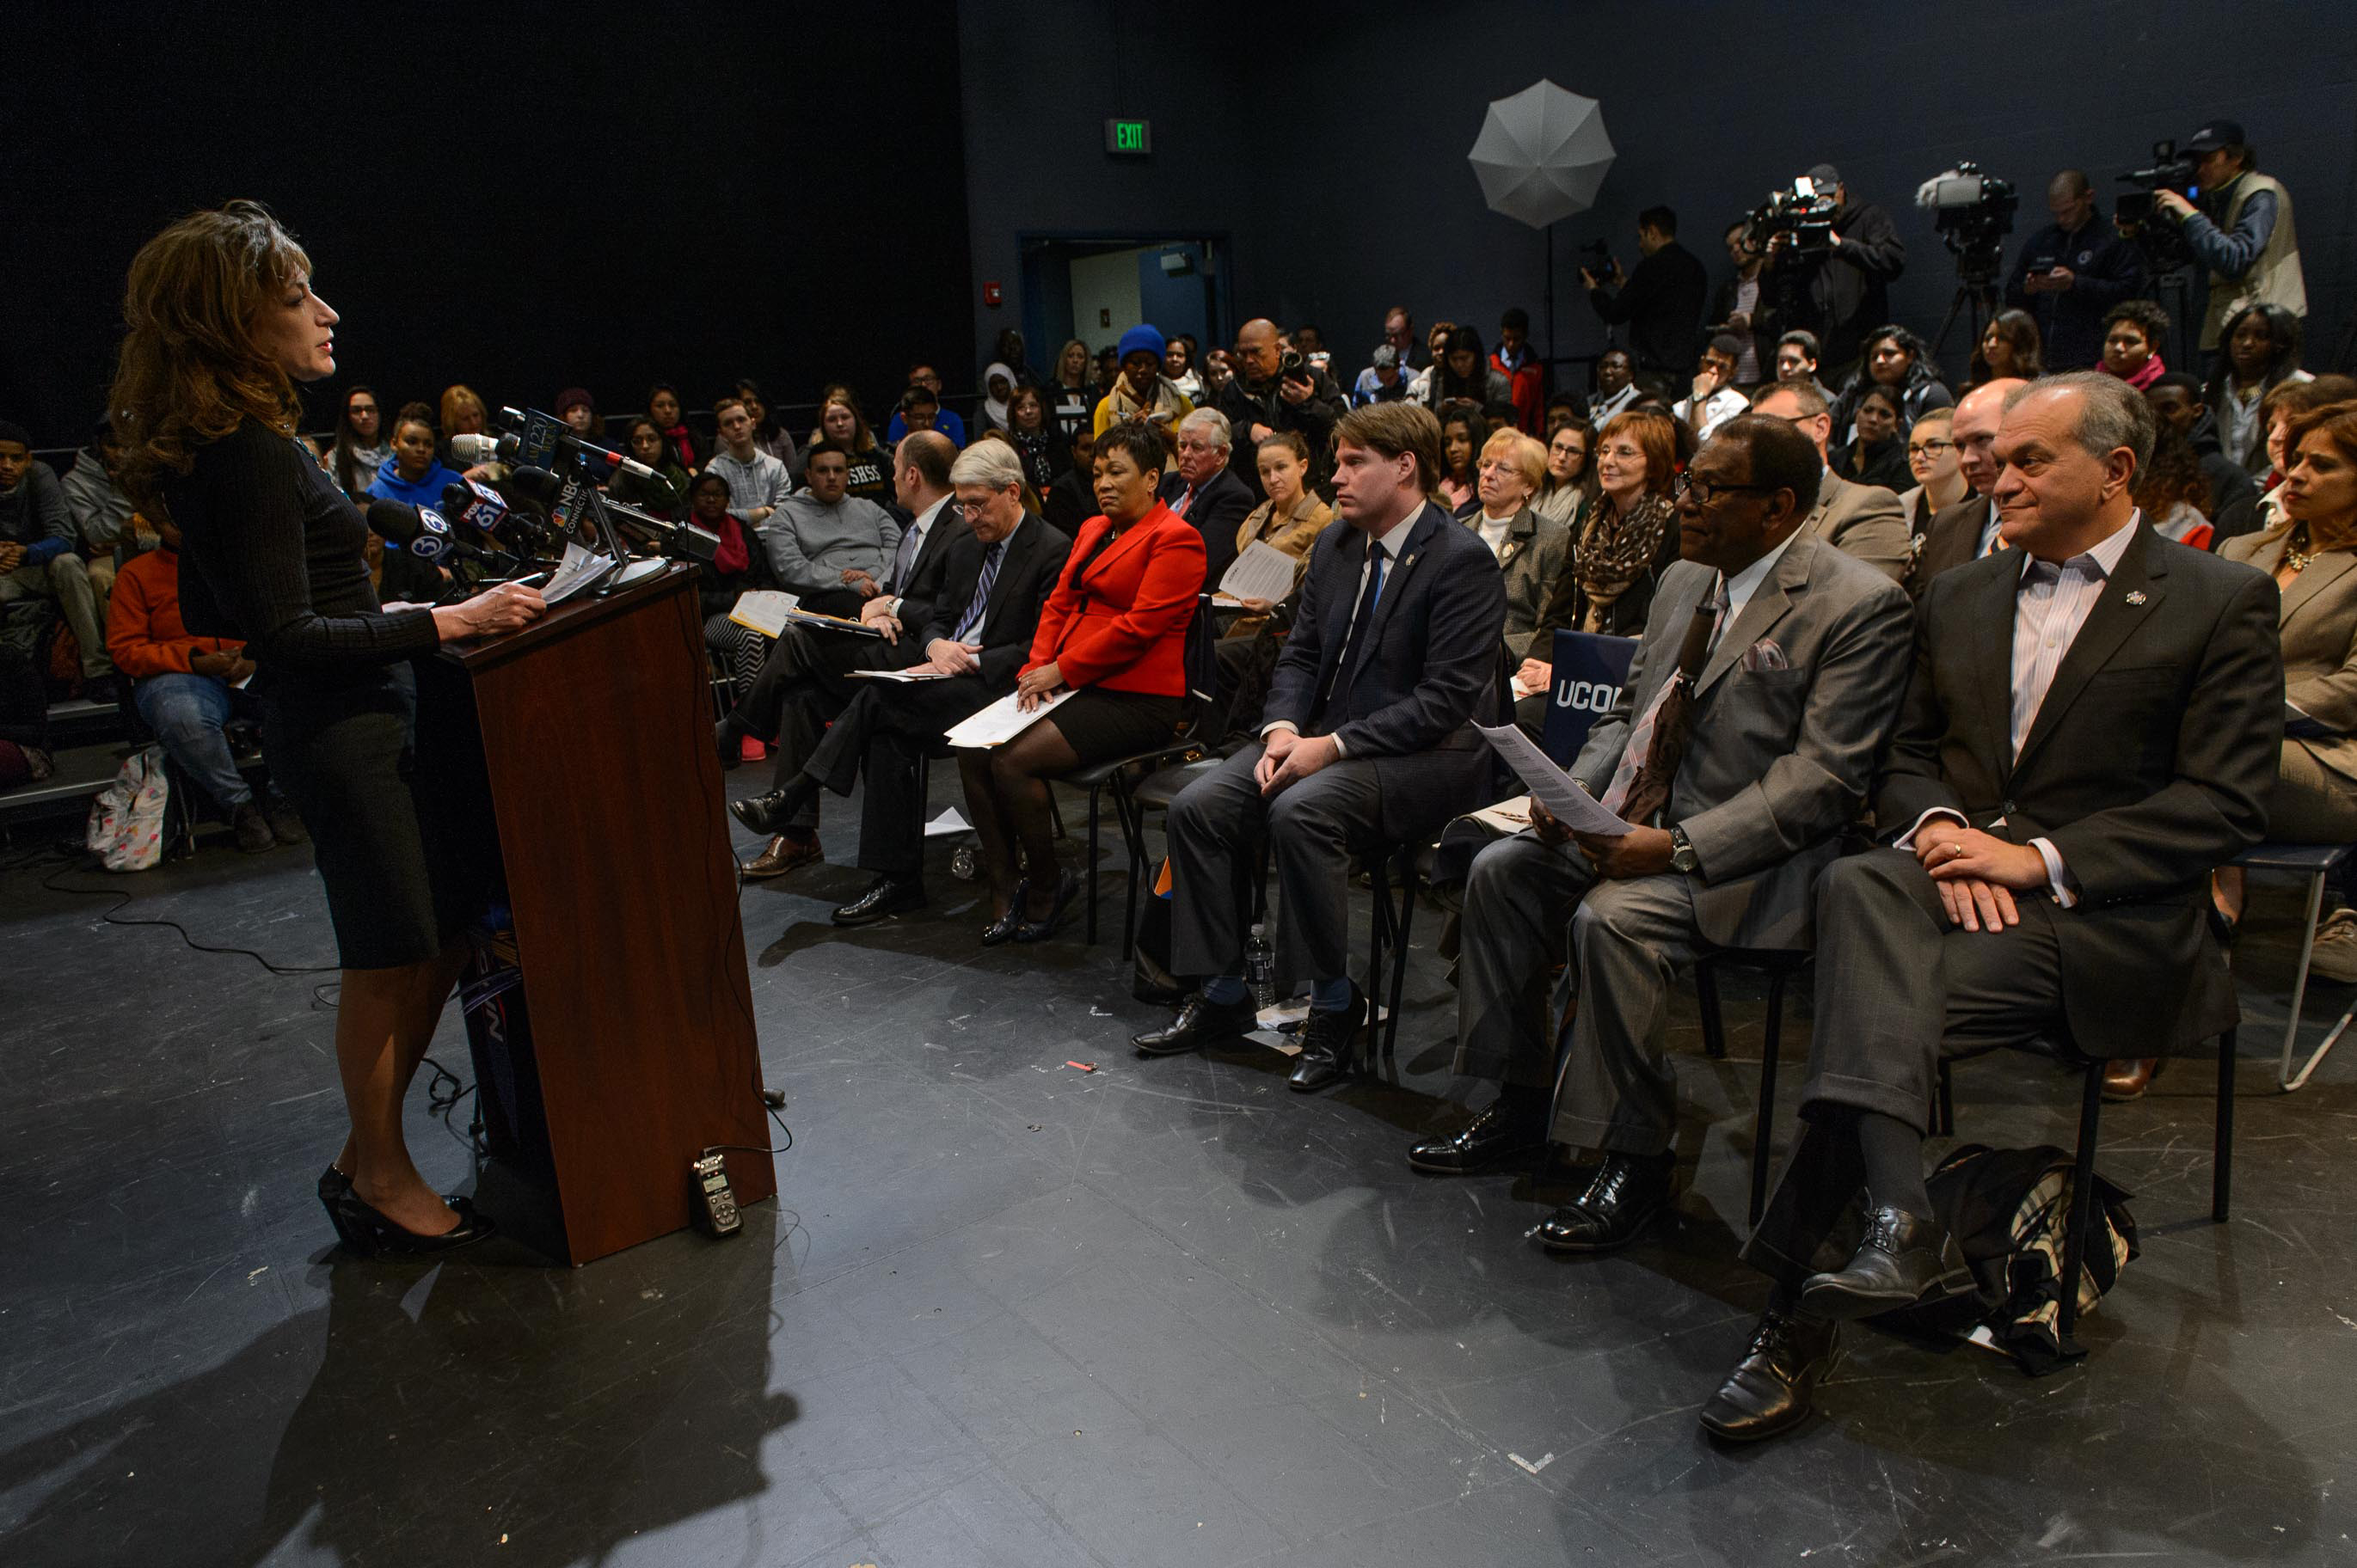 President Susan Herbst speaks during an event to announce an additional financial commitment for New Haven Promise students held at the Cooperative Arts and Humanities High School in New Haven on Dec. 1, 2015. (Peter Morenus/UConn Photo)